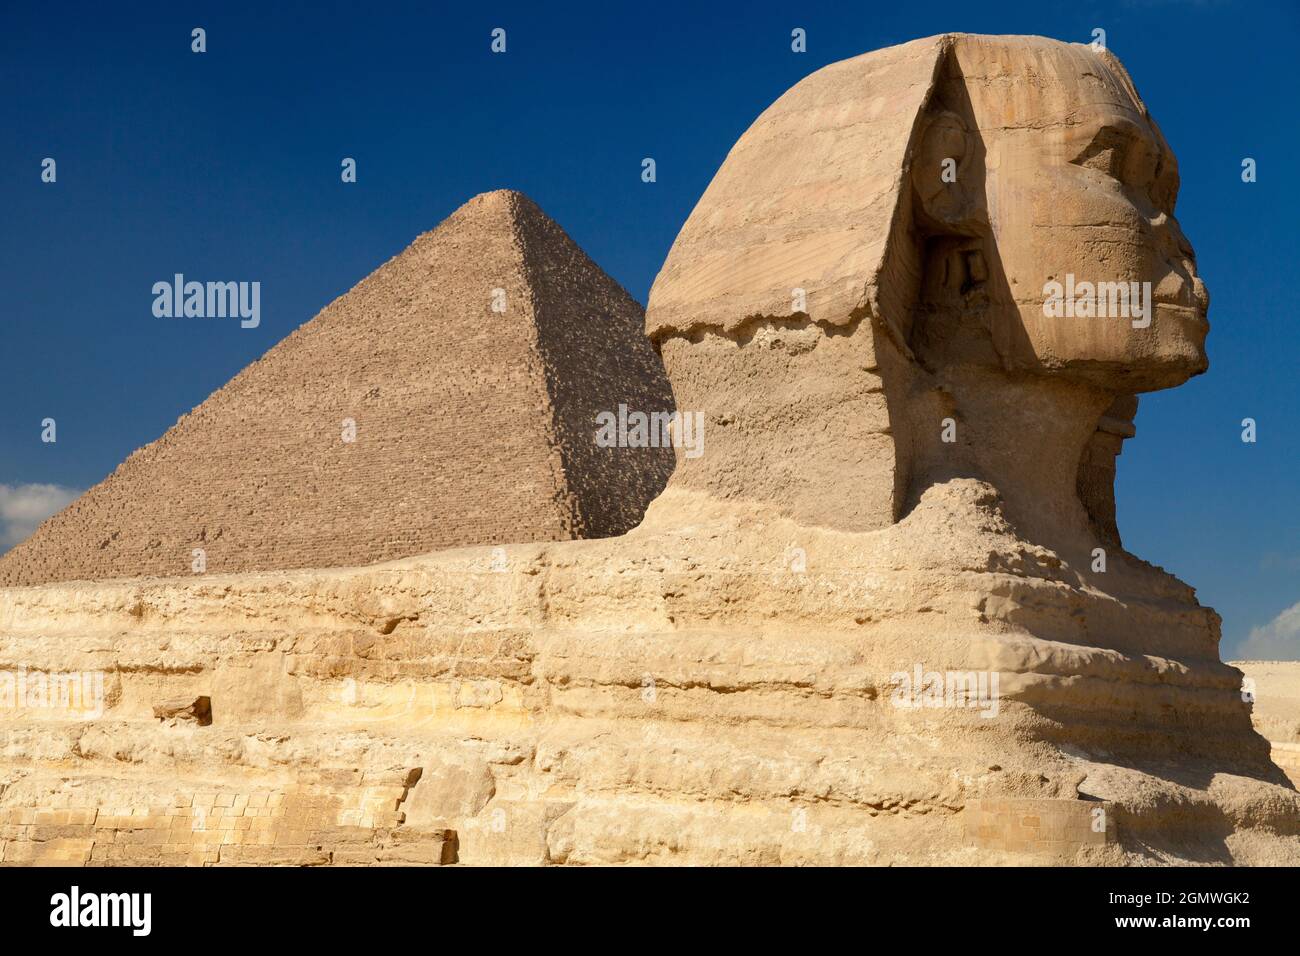 Cairo, Egypt - 7 December 2010; A sphinx is a mythical creature with the head of a human and the body of a lion. The most famous depiction of such a c Stock Photo